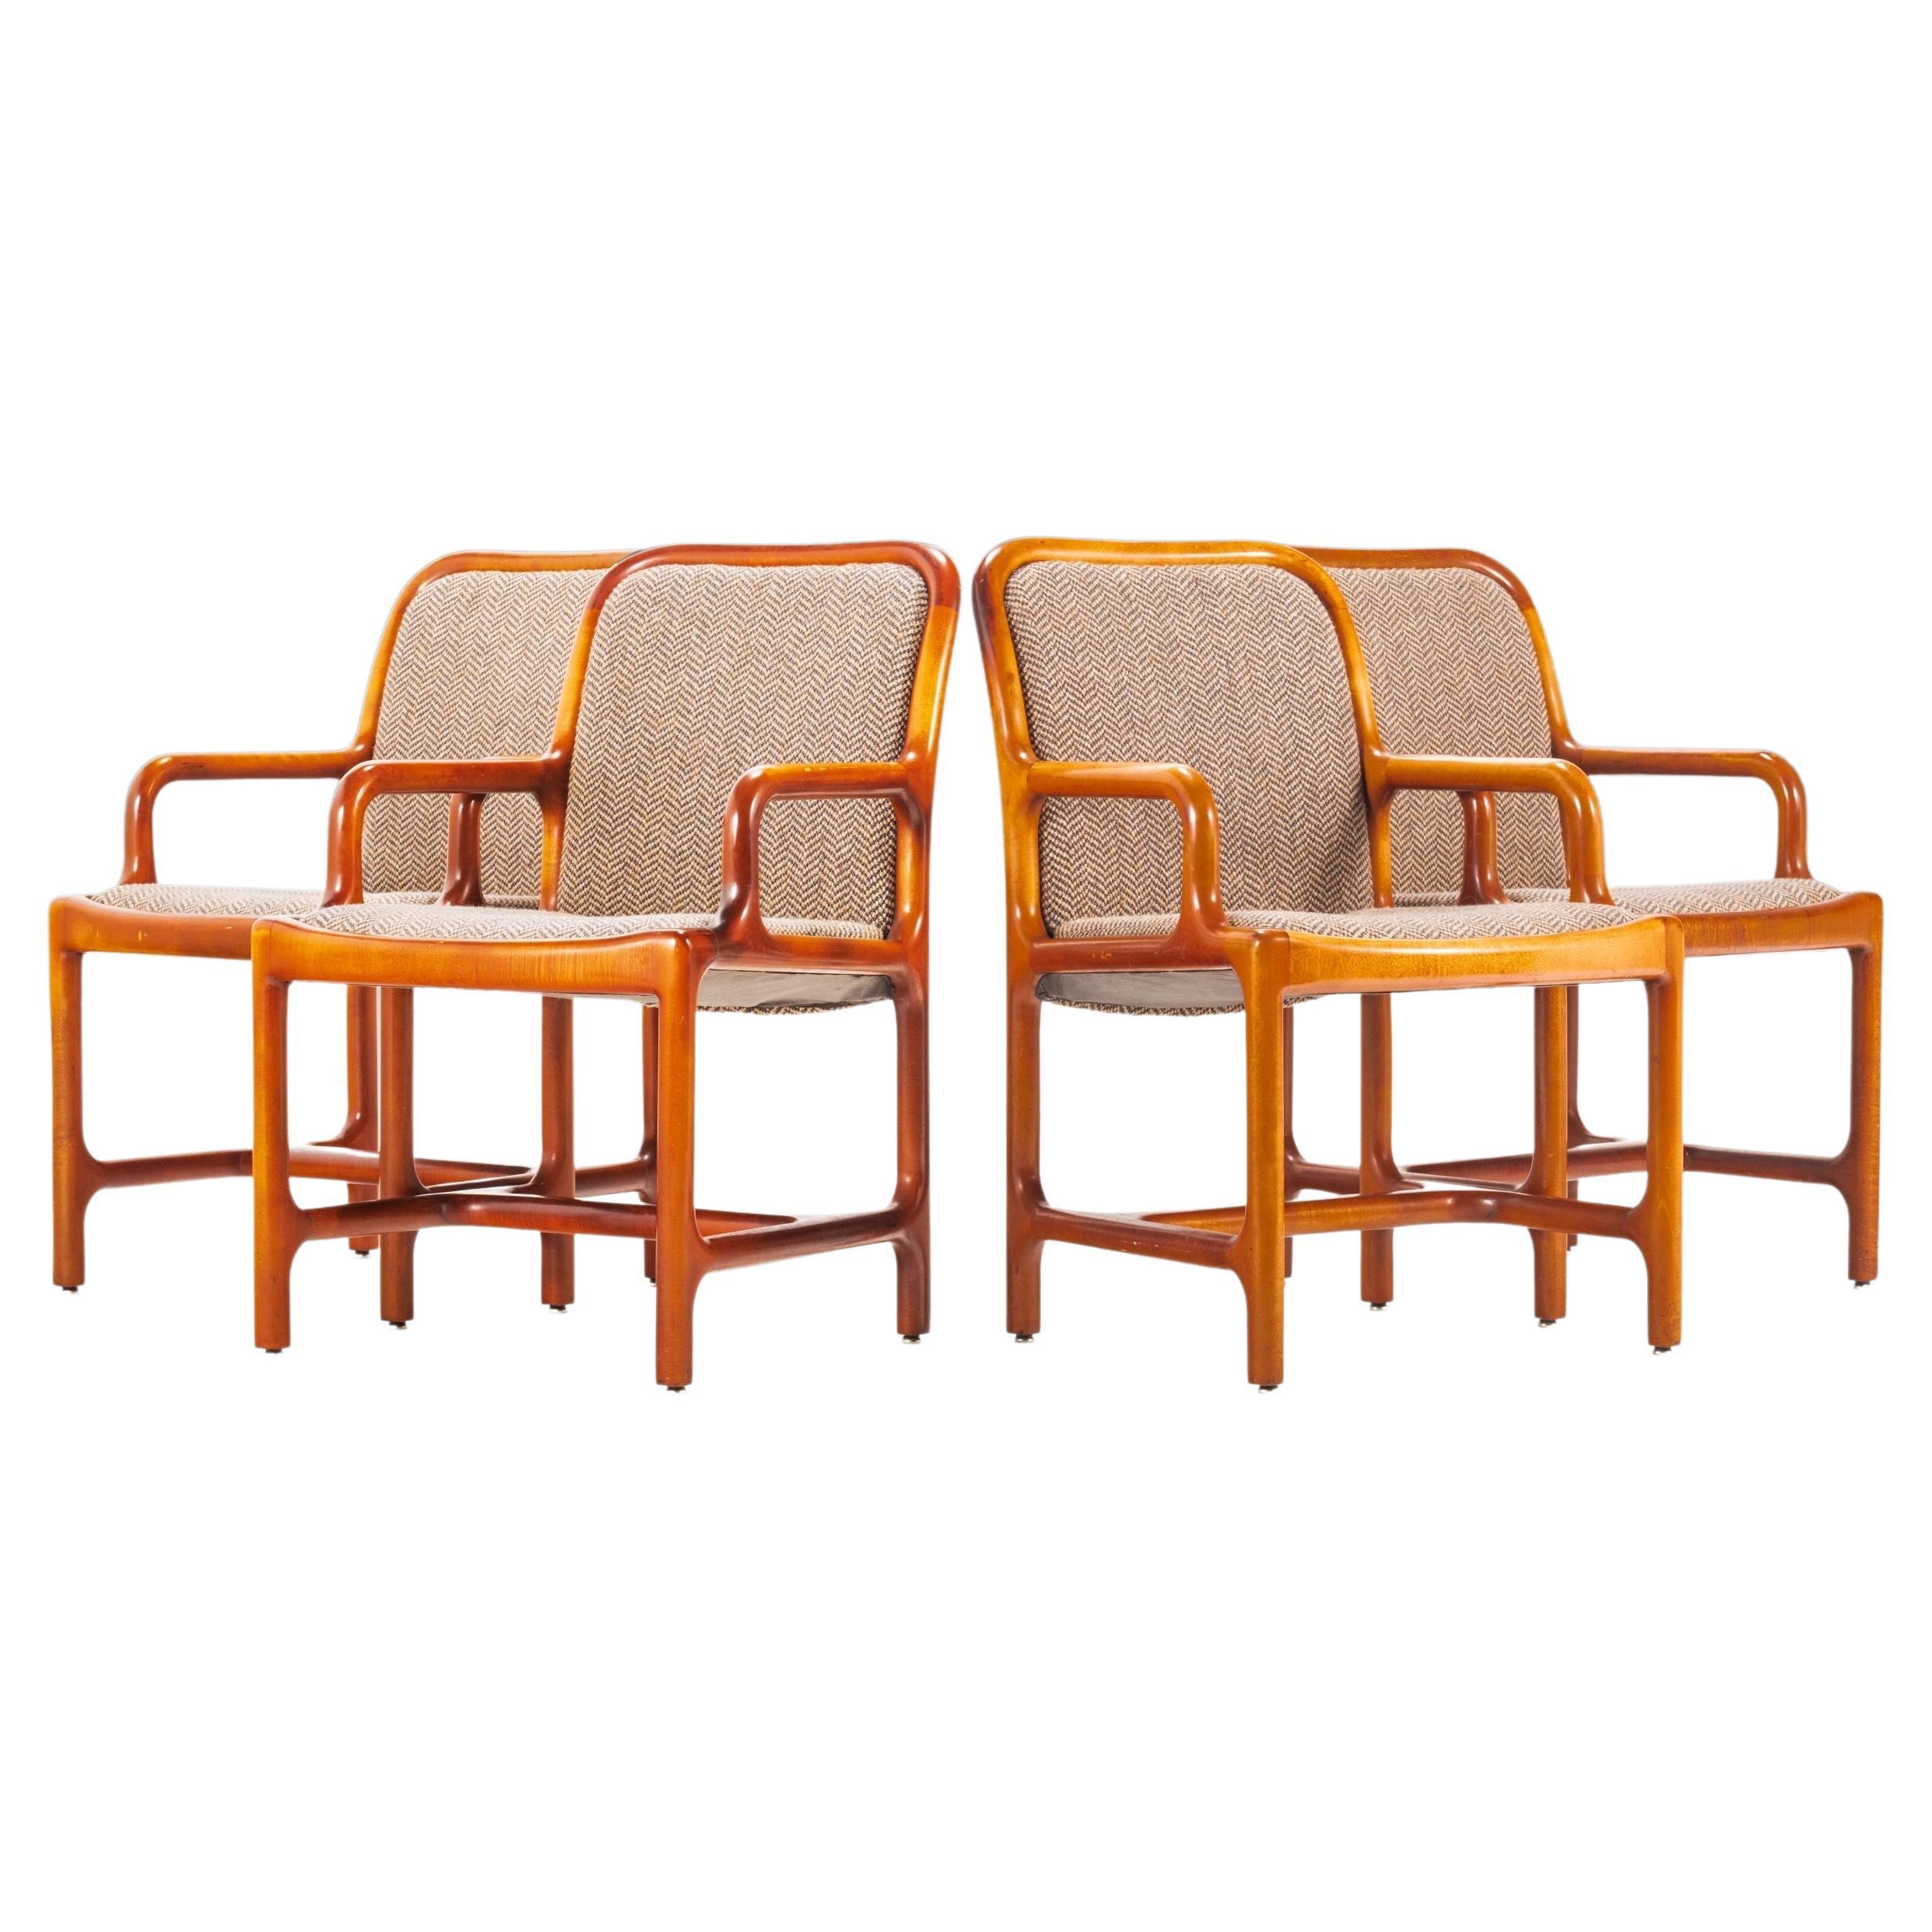 Set of Four (4) Pretzel Chairs in Oak and Original Tweed Fabric, USA, c. 1960's For Sale